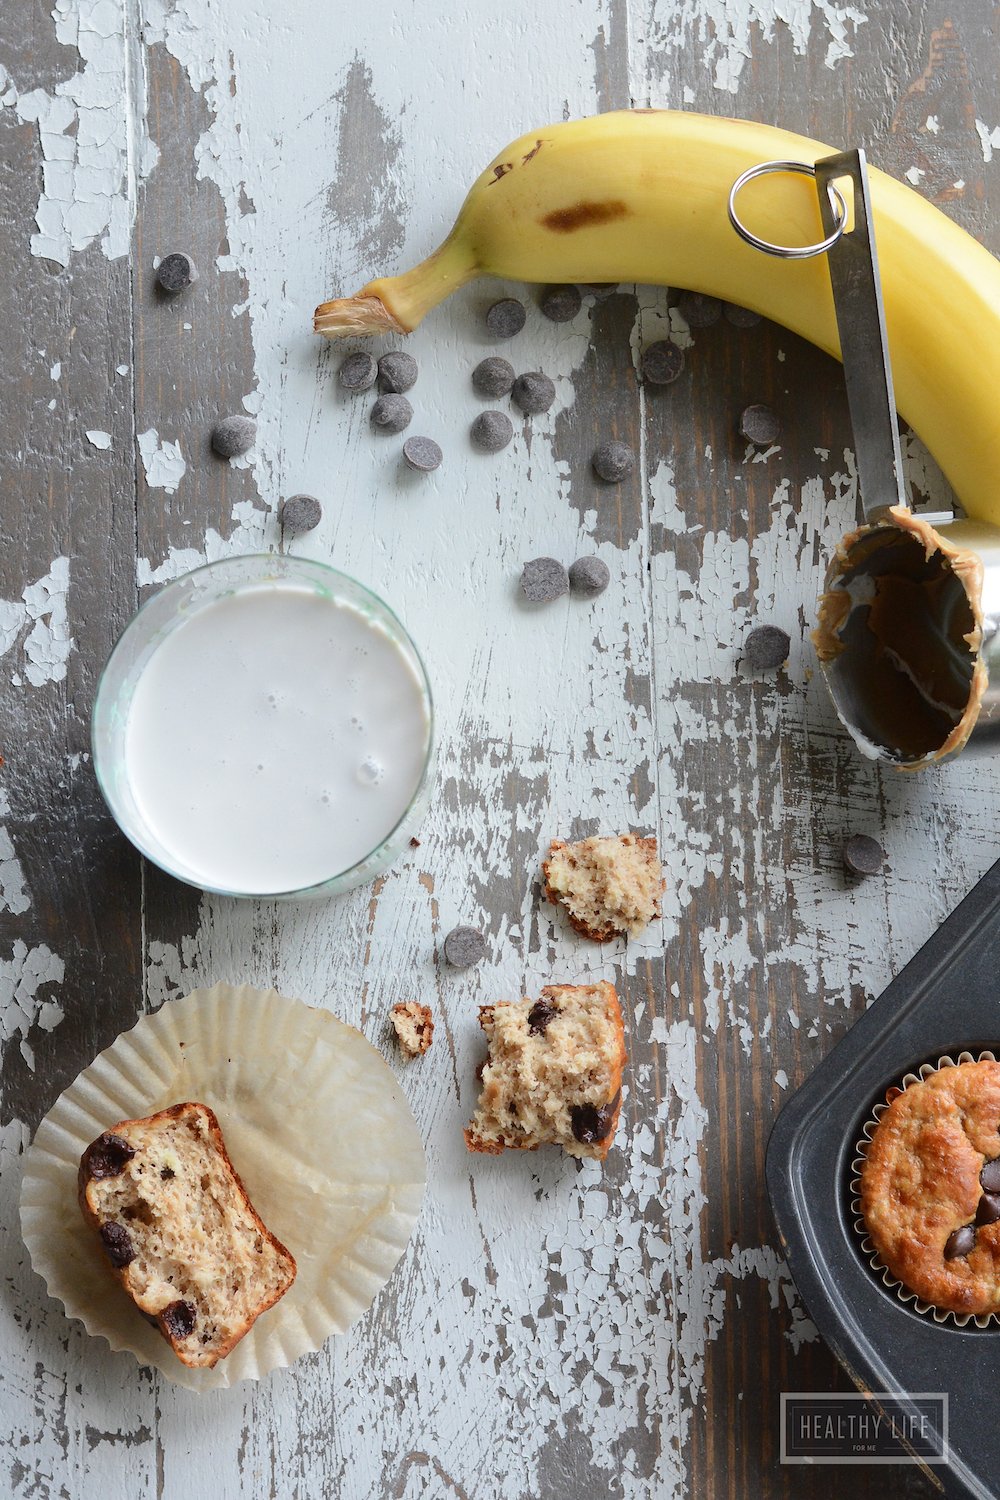 A crumbled protein muffin with a banana and a glass of milk on the side.